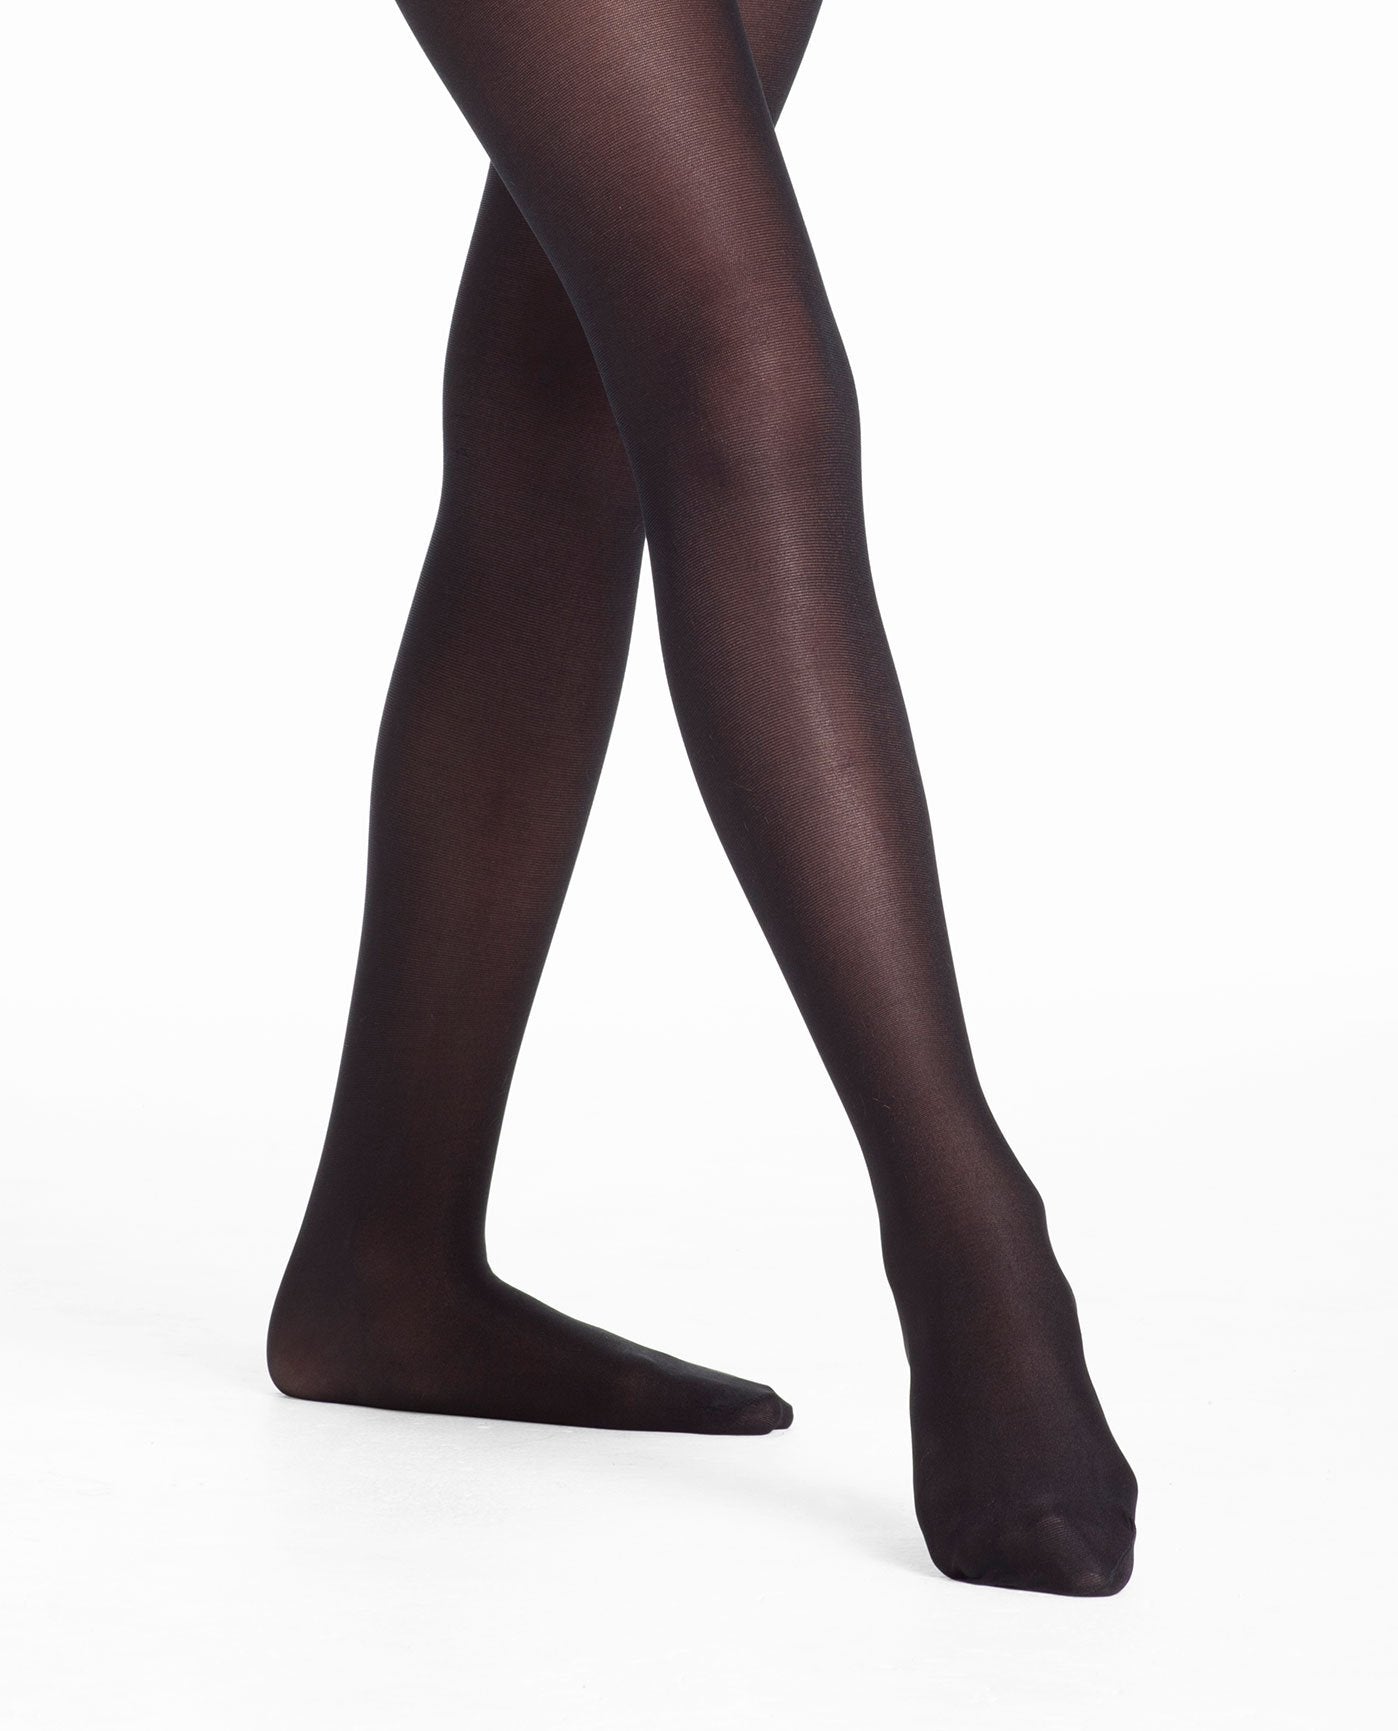  Girls Tights Size 14-16